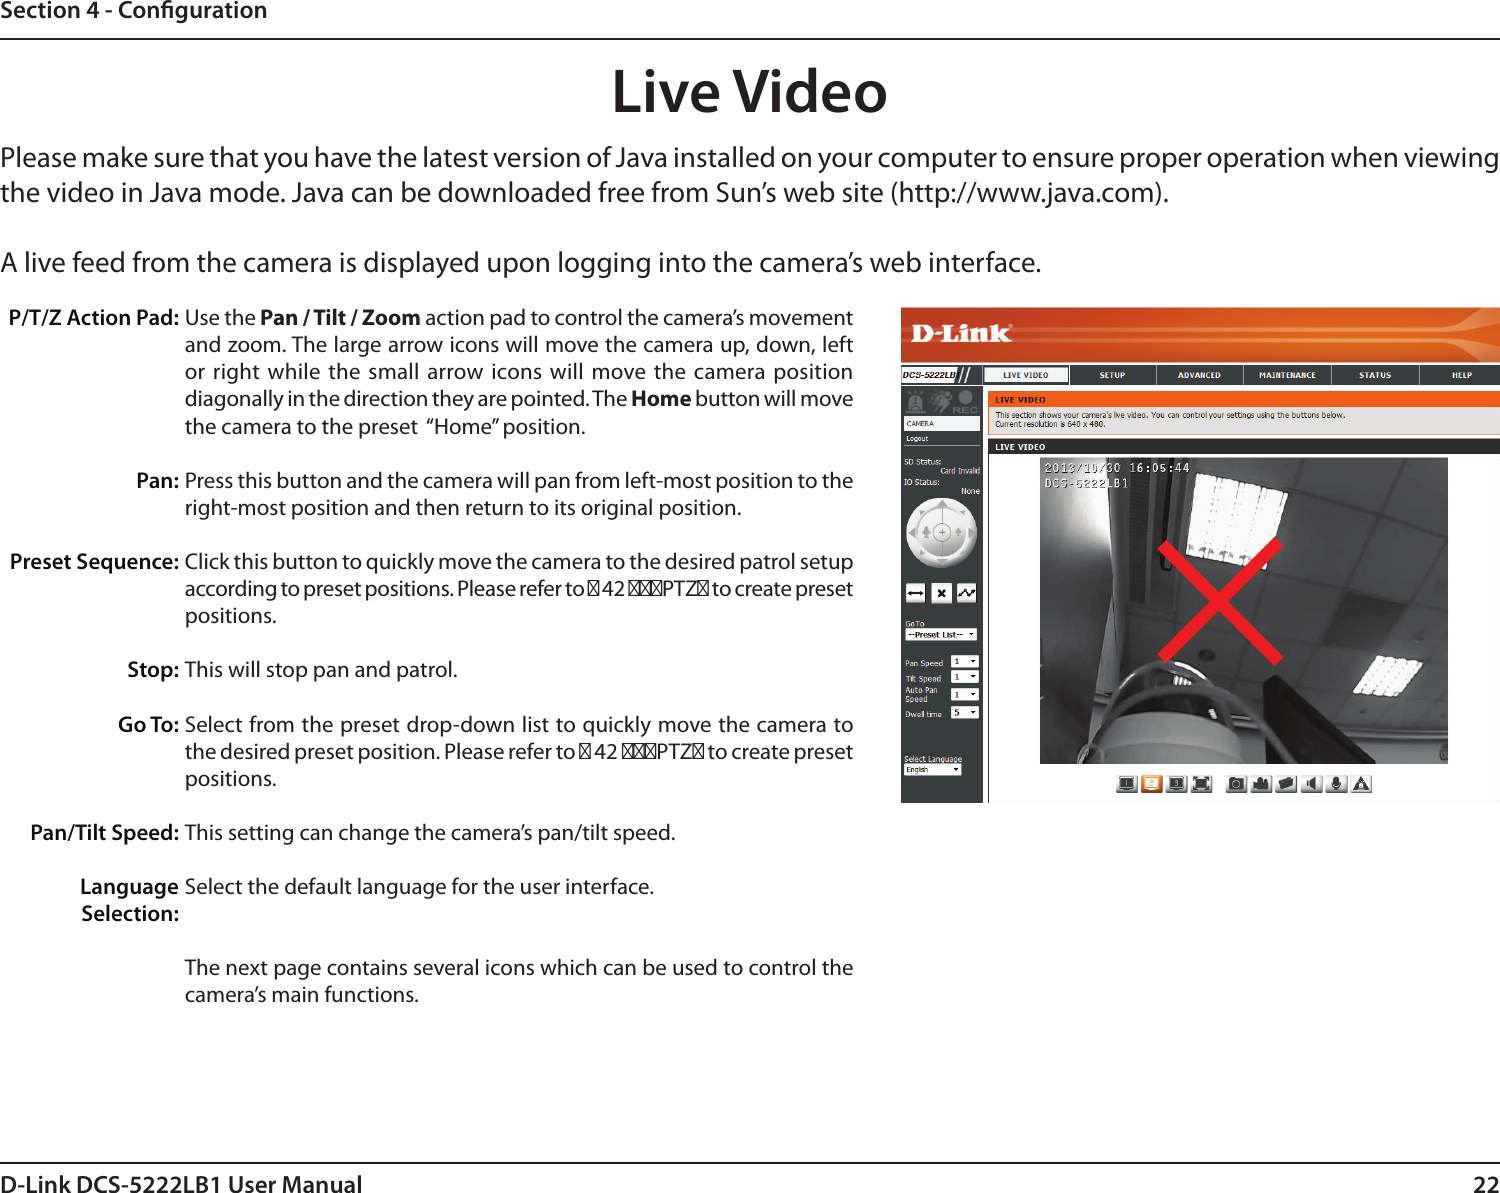 22D-Link DCS-5222LB1 User ManualSection 4 - CongurationLive VideoPlease make sure that you have the latest version of Java installed on your computer to ensure proper operation when viewing the video in Java mode. Java can be downloaded free from Sun’s web site (http://www.java.com).A live feed from the camera is displayed upon logging into the camera’s web interface.Use the Pan / Tilt / Zoom action pad to control the camera’s movement and zoom. The large arrow icons will move the camera up, down, left or right while the  small  arrow icons will move the camera position diagonally in the direction they are pointed. The Home button will move the camera to the preset  “Home” position. Press this button and the camera will pan from left-most position to the right-most position and then return to its original position.Click this button to quickly move the camera to the desired patrol setup according to preset positions. Please refer to 第 42 第第第PTZ第 to create preset positions.This will stop pan and patrol.Select from the preset drop-down list to quickly move the camera to the desired preset position. Please refer to 第 42 第第第PTZ第 to create preset positions.This setting can change the camera’s pan/tilt speed.Select the default language for the user interface.The next page contains several icons which can be used to control the camera’s main functions.P/T/Z Action Pad:Pan:Preset Sequence:Stop: Go To:Pan/Tilt Speed:Language Selection: